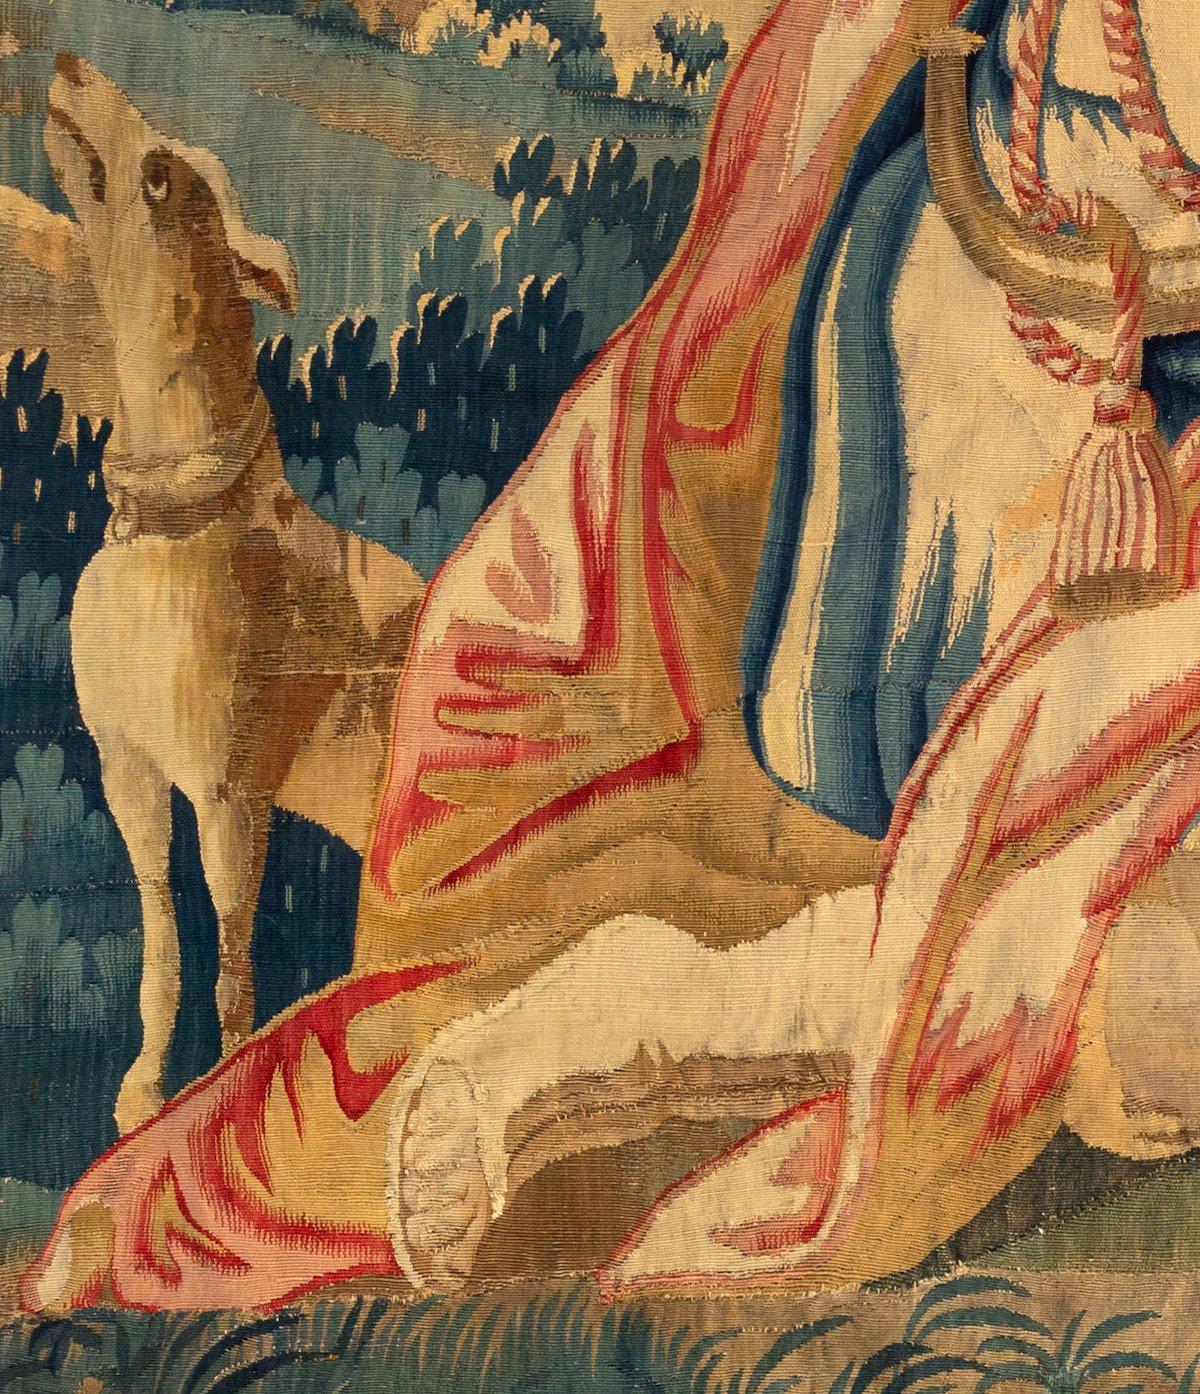 Tapestries were ubiquitous in the castles and churches of the late medieval and Renaissance eras. At a practical level, they provided a form of insulation and decoration that could be easily transported. In addition, the process of tapestry weaving,